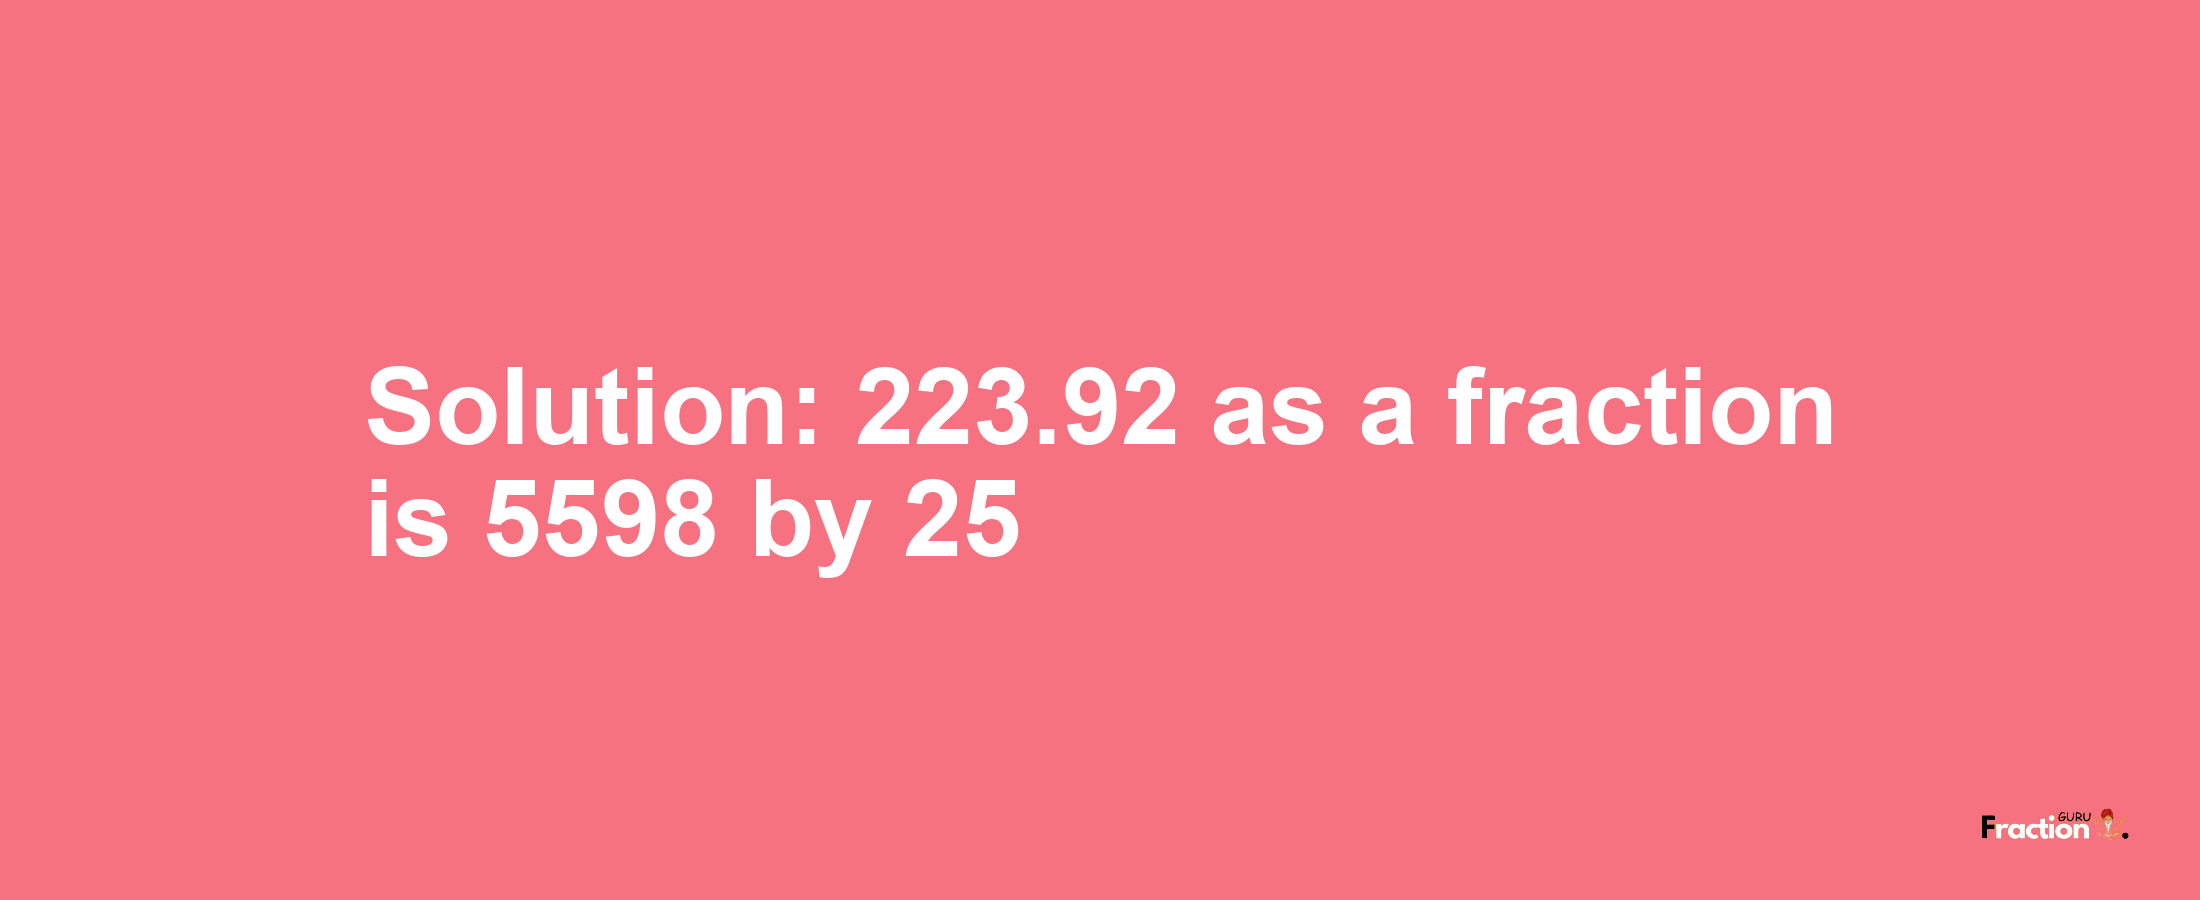 Solution:223.92 as a fraction is 5598/25